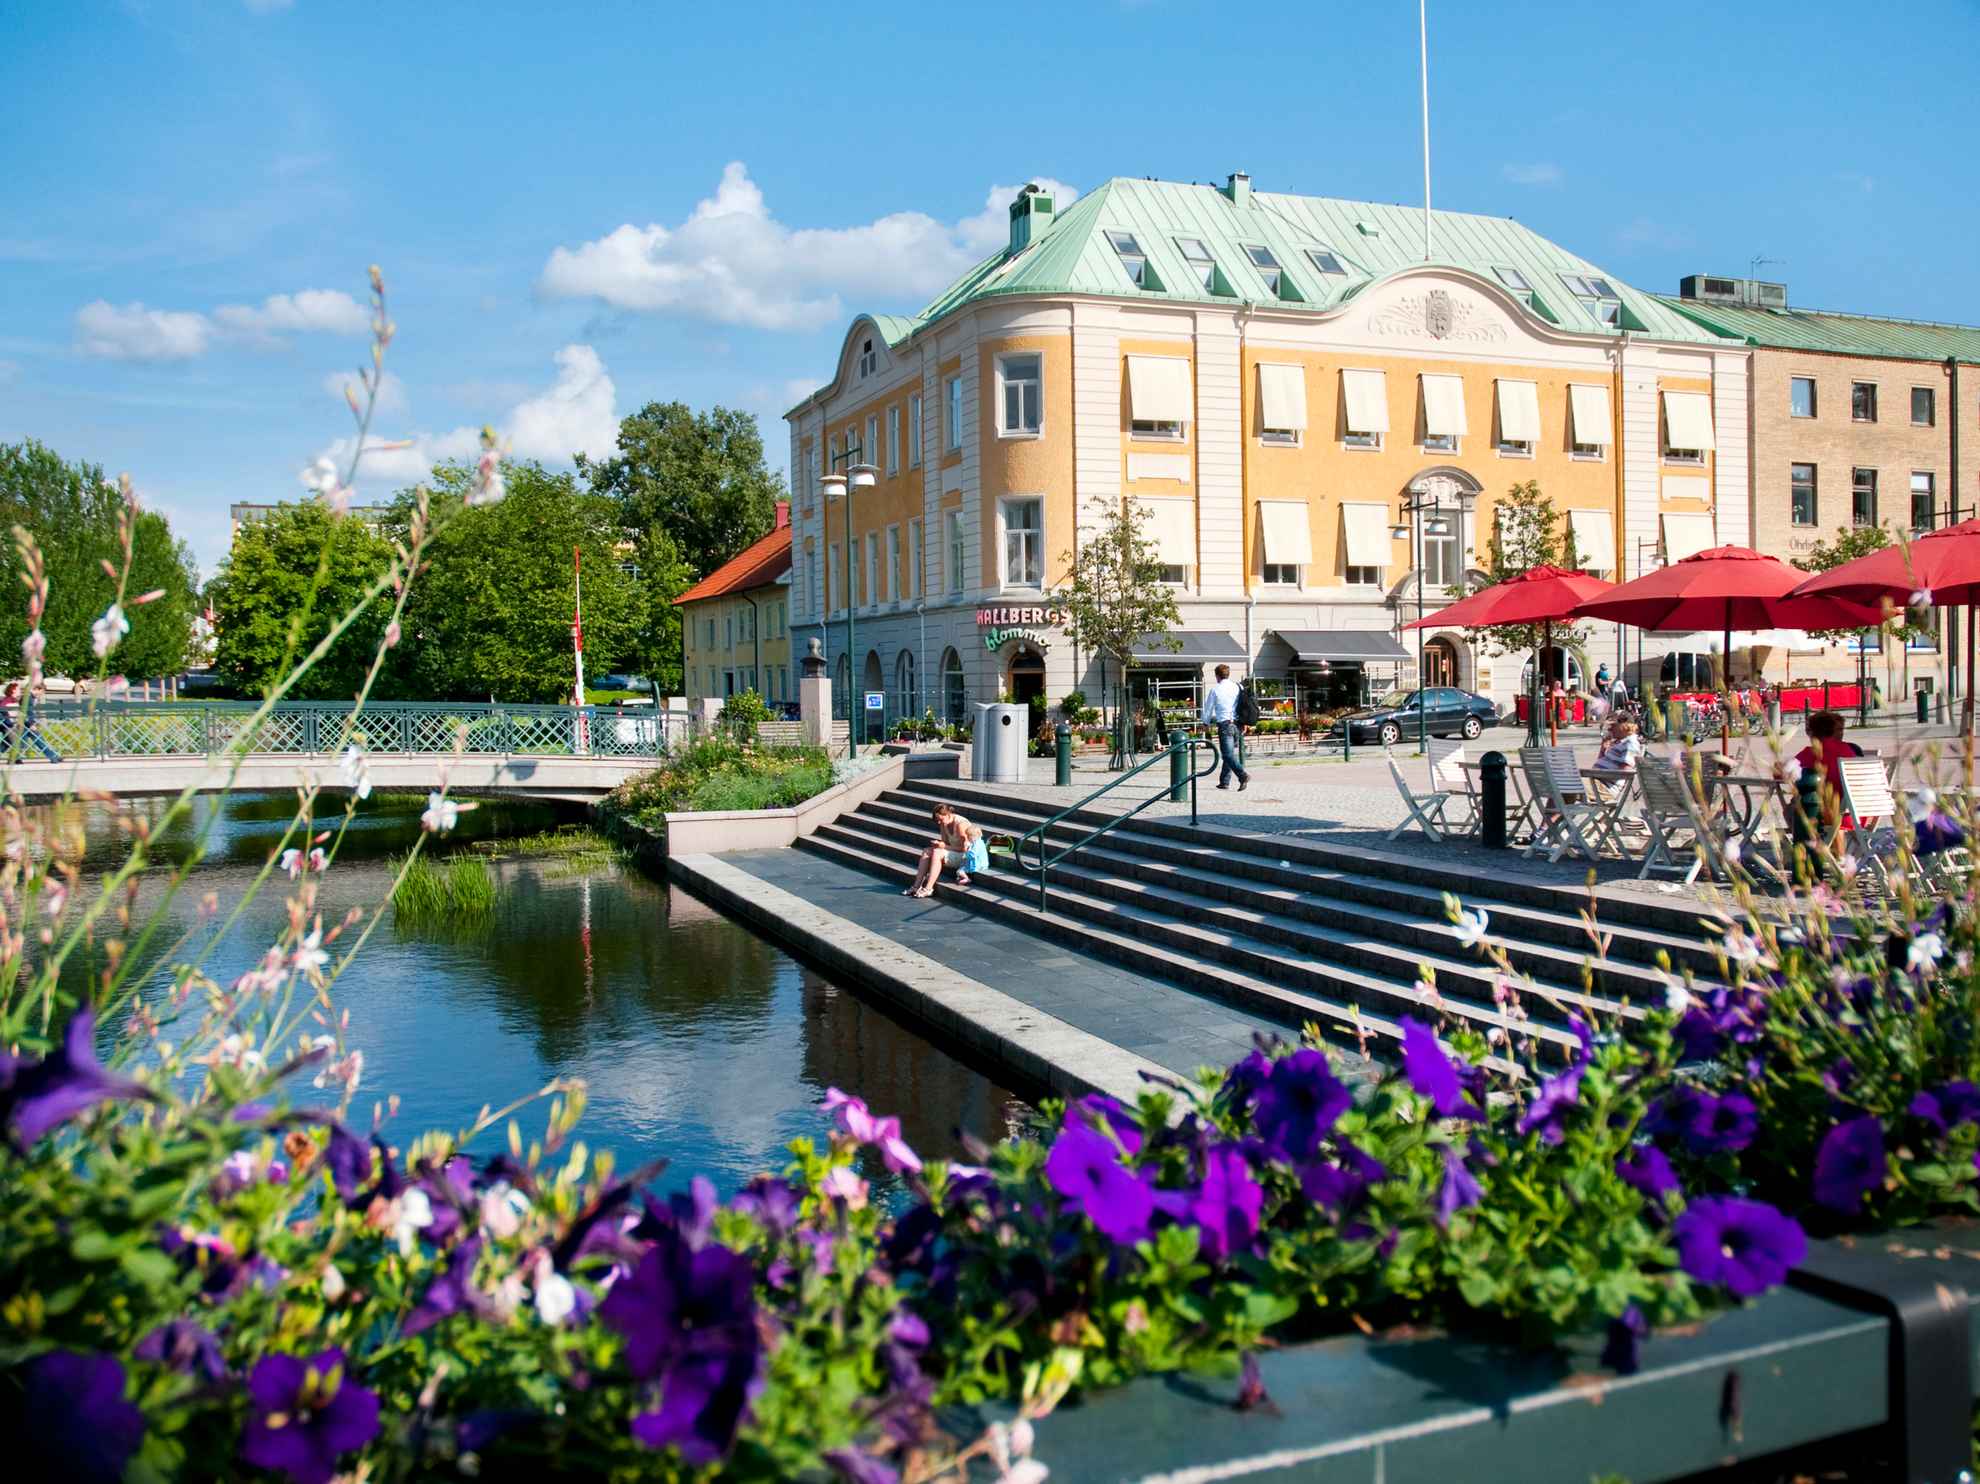 Sunny day in Alingsås. City centre with stairs and a bridge over Lillån. Purple flowers in the foreground.